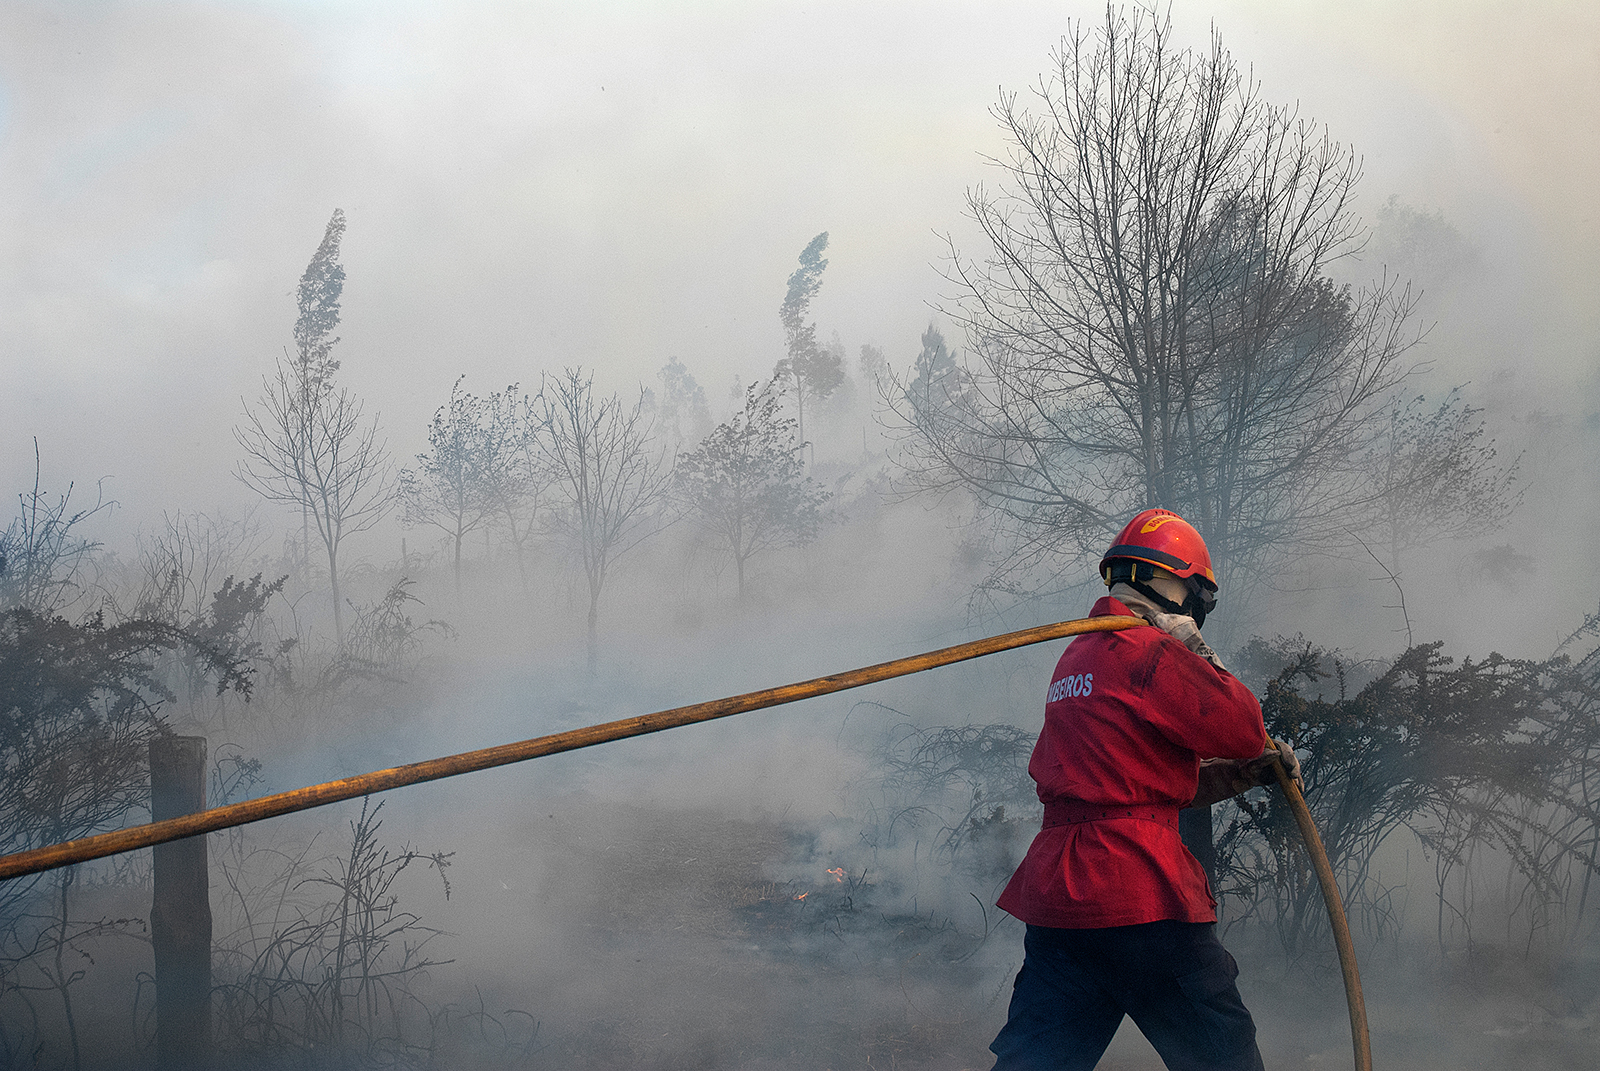 Firefighters working in the aftermath of a forest fire in Portugal. Photo: Shutterstock